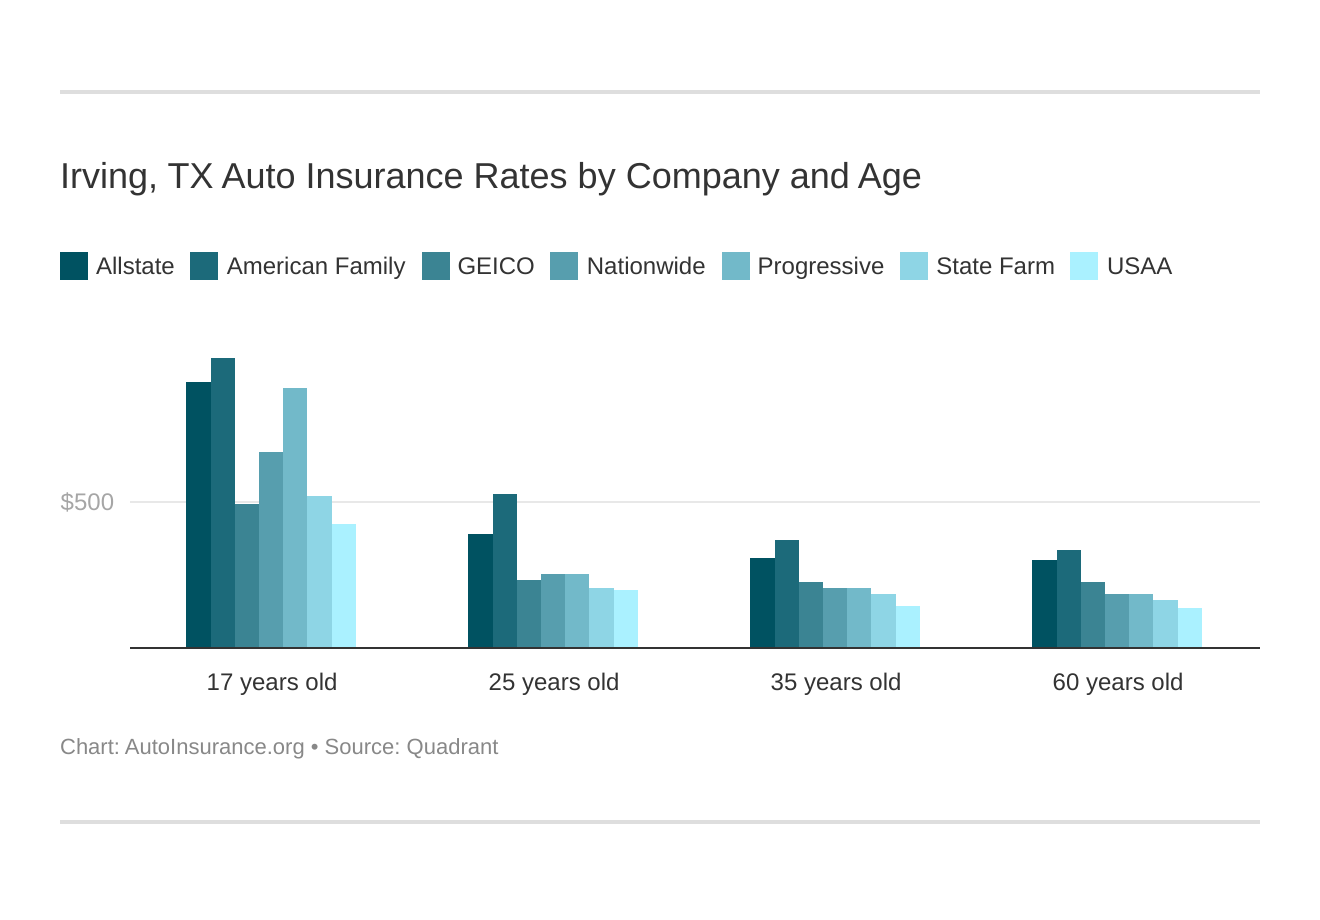 Irving, TX Auto Insurance Rates by Company and Age